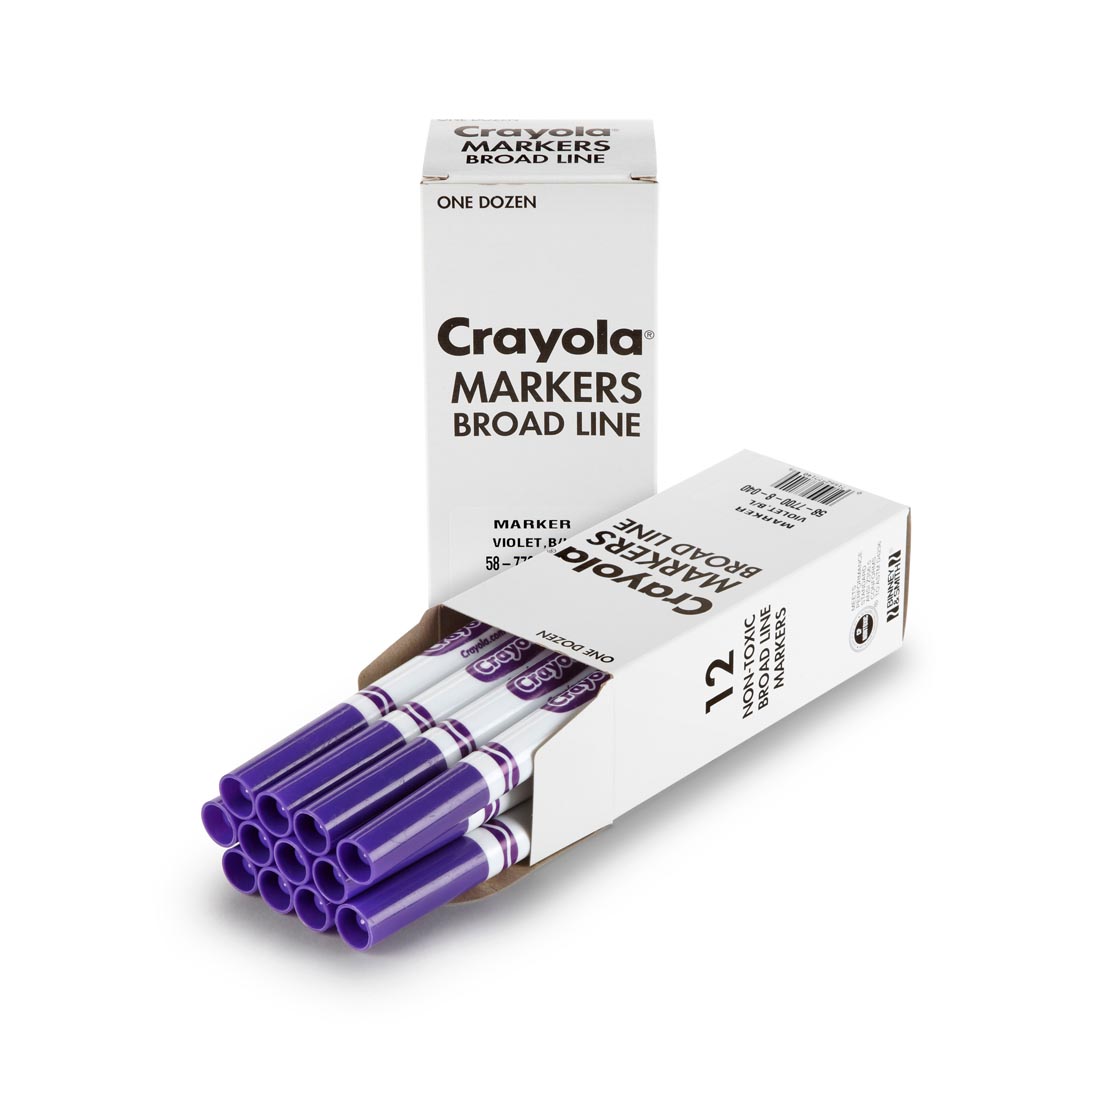 Box of Crayola Broad Line Marker Refills shown both closed and open with 12 Violet Markers